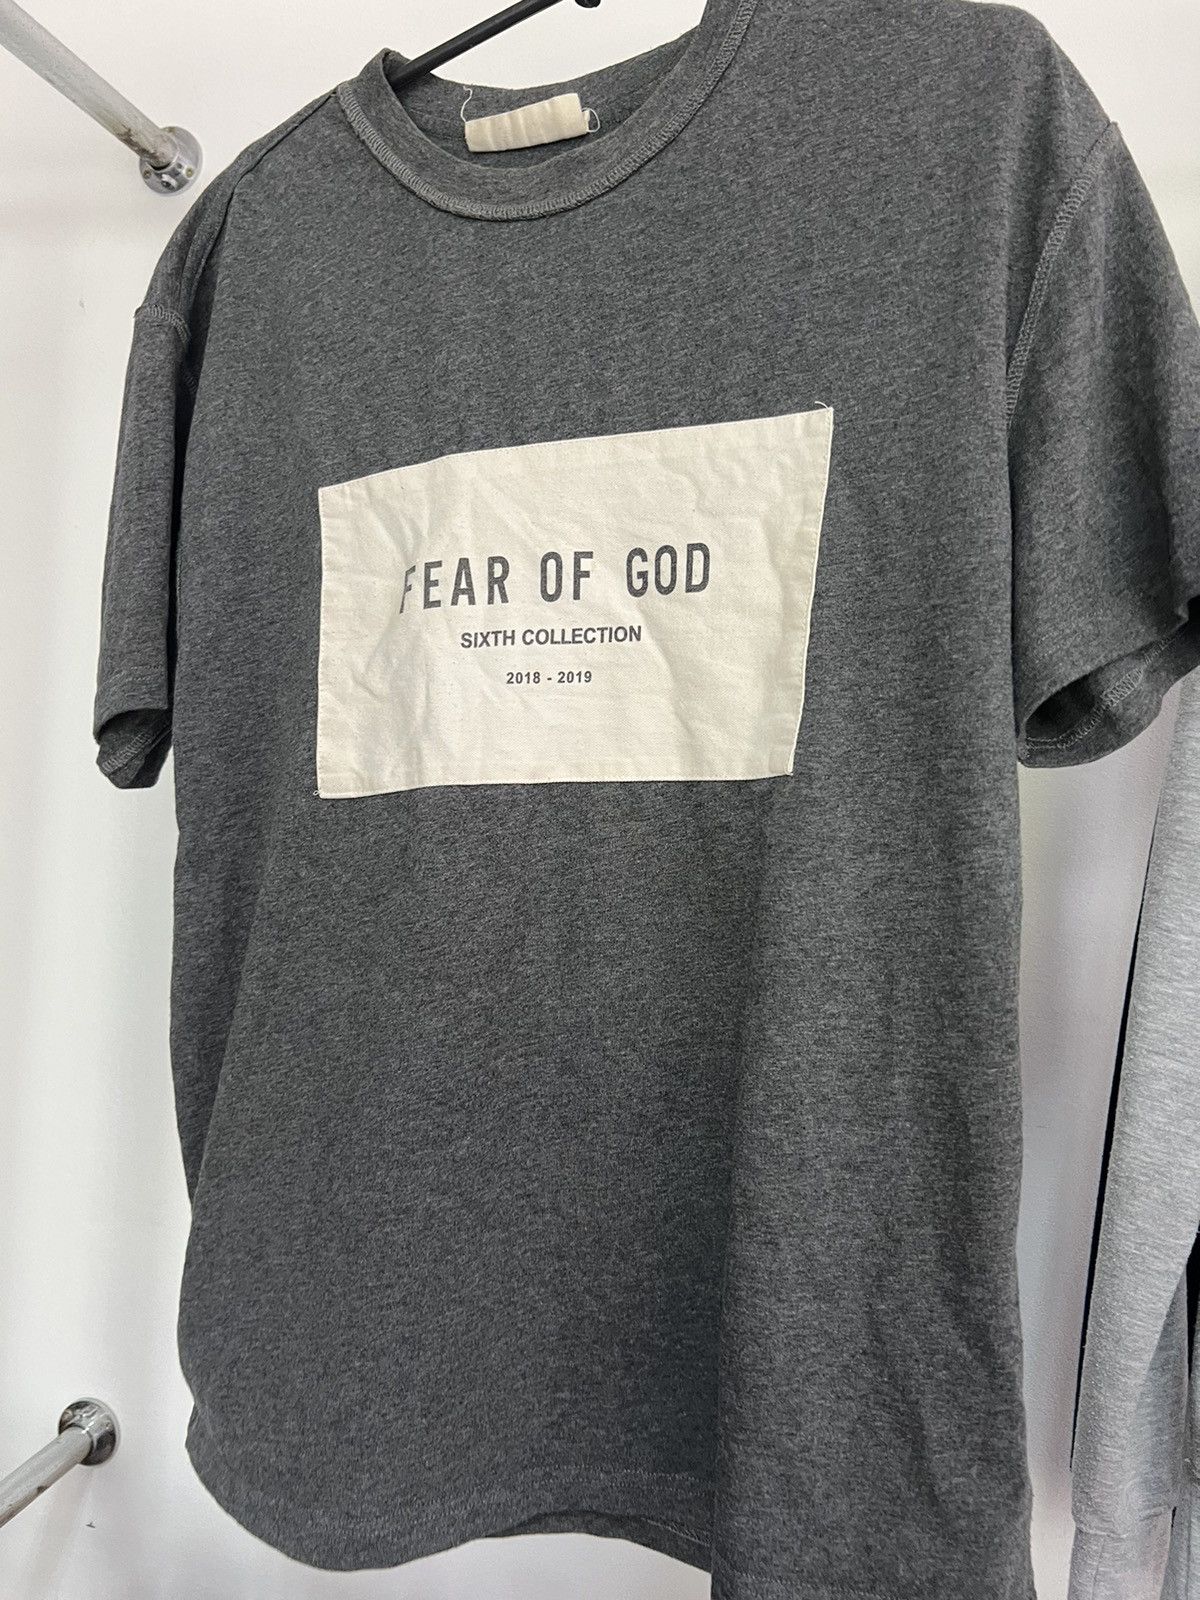 Fear of God Fear of god sixth collection 2018 2019 t-shirt | Grailed